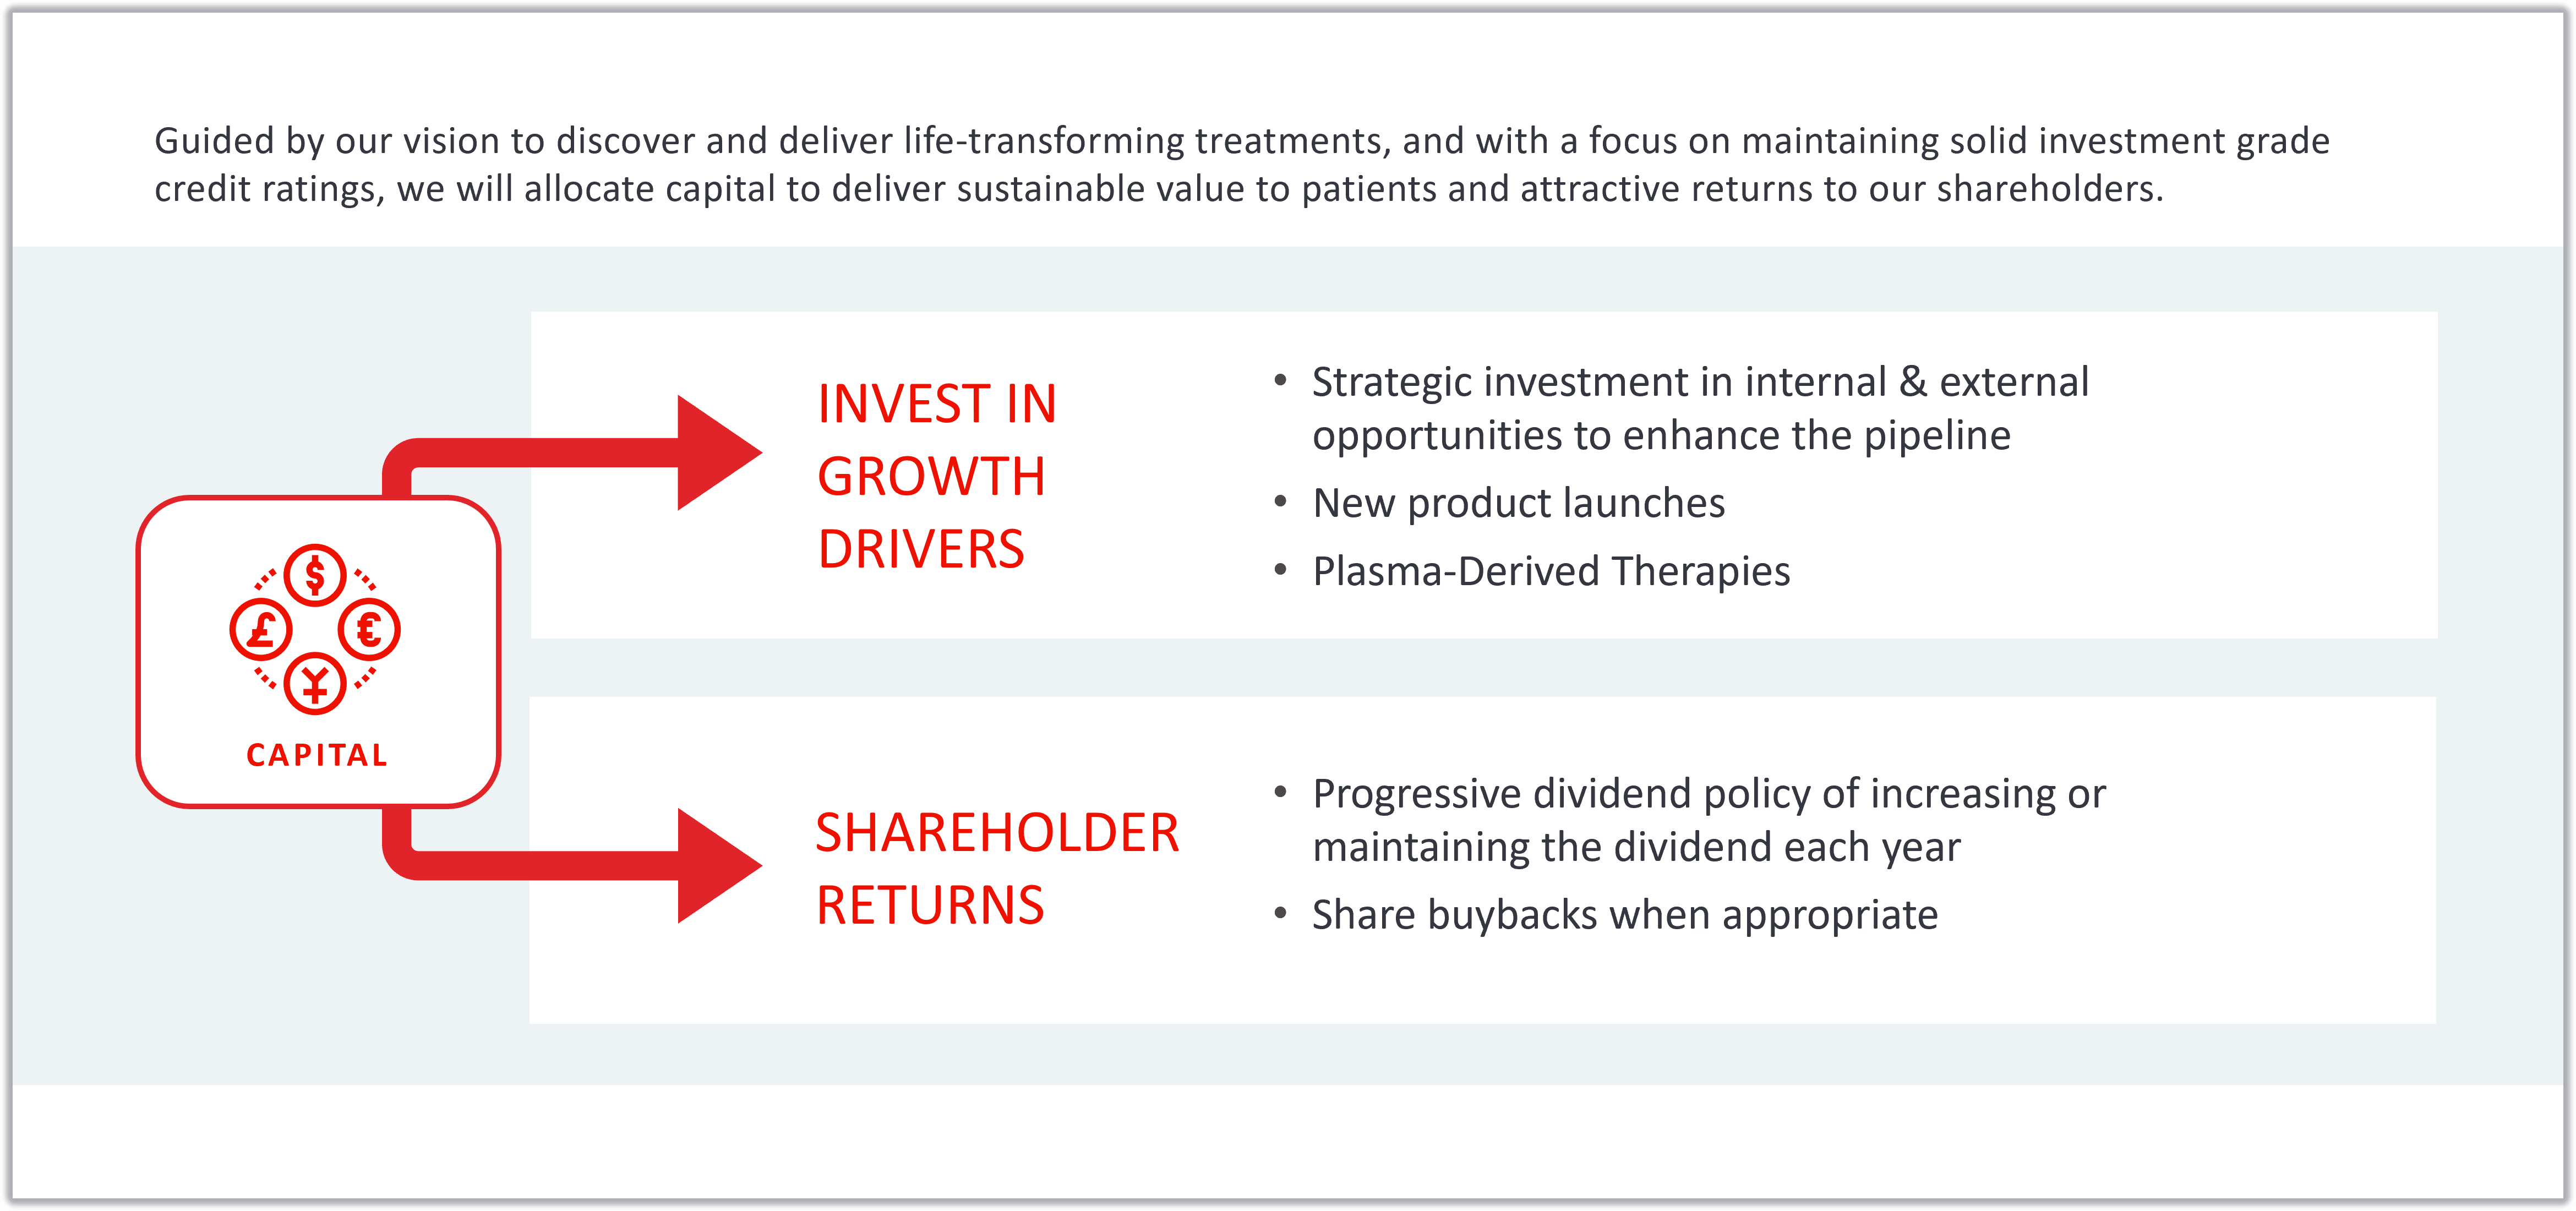 A diagram showing our capital allocation policy. Guided by our vision to discover and deliver life-transforming treatments, and with a focus on maintaining solid investment grade credit ratings, we will allocate capital to deliver sustainable value to patients and attractive returns to our shareholders. 
Takeda's policy in the allocation of capital is as follows. Invest in growth drivers, which includes strategic investment in internal and external opportunities to enhance the pipeline, new product launches and Plasma-Derived Therapies. And shareholder returns, which includes our progressive dividend policy of increasing or maintaining the dividend each year and share buybacks when appropriate.